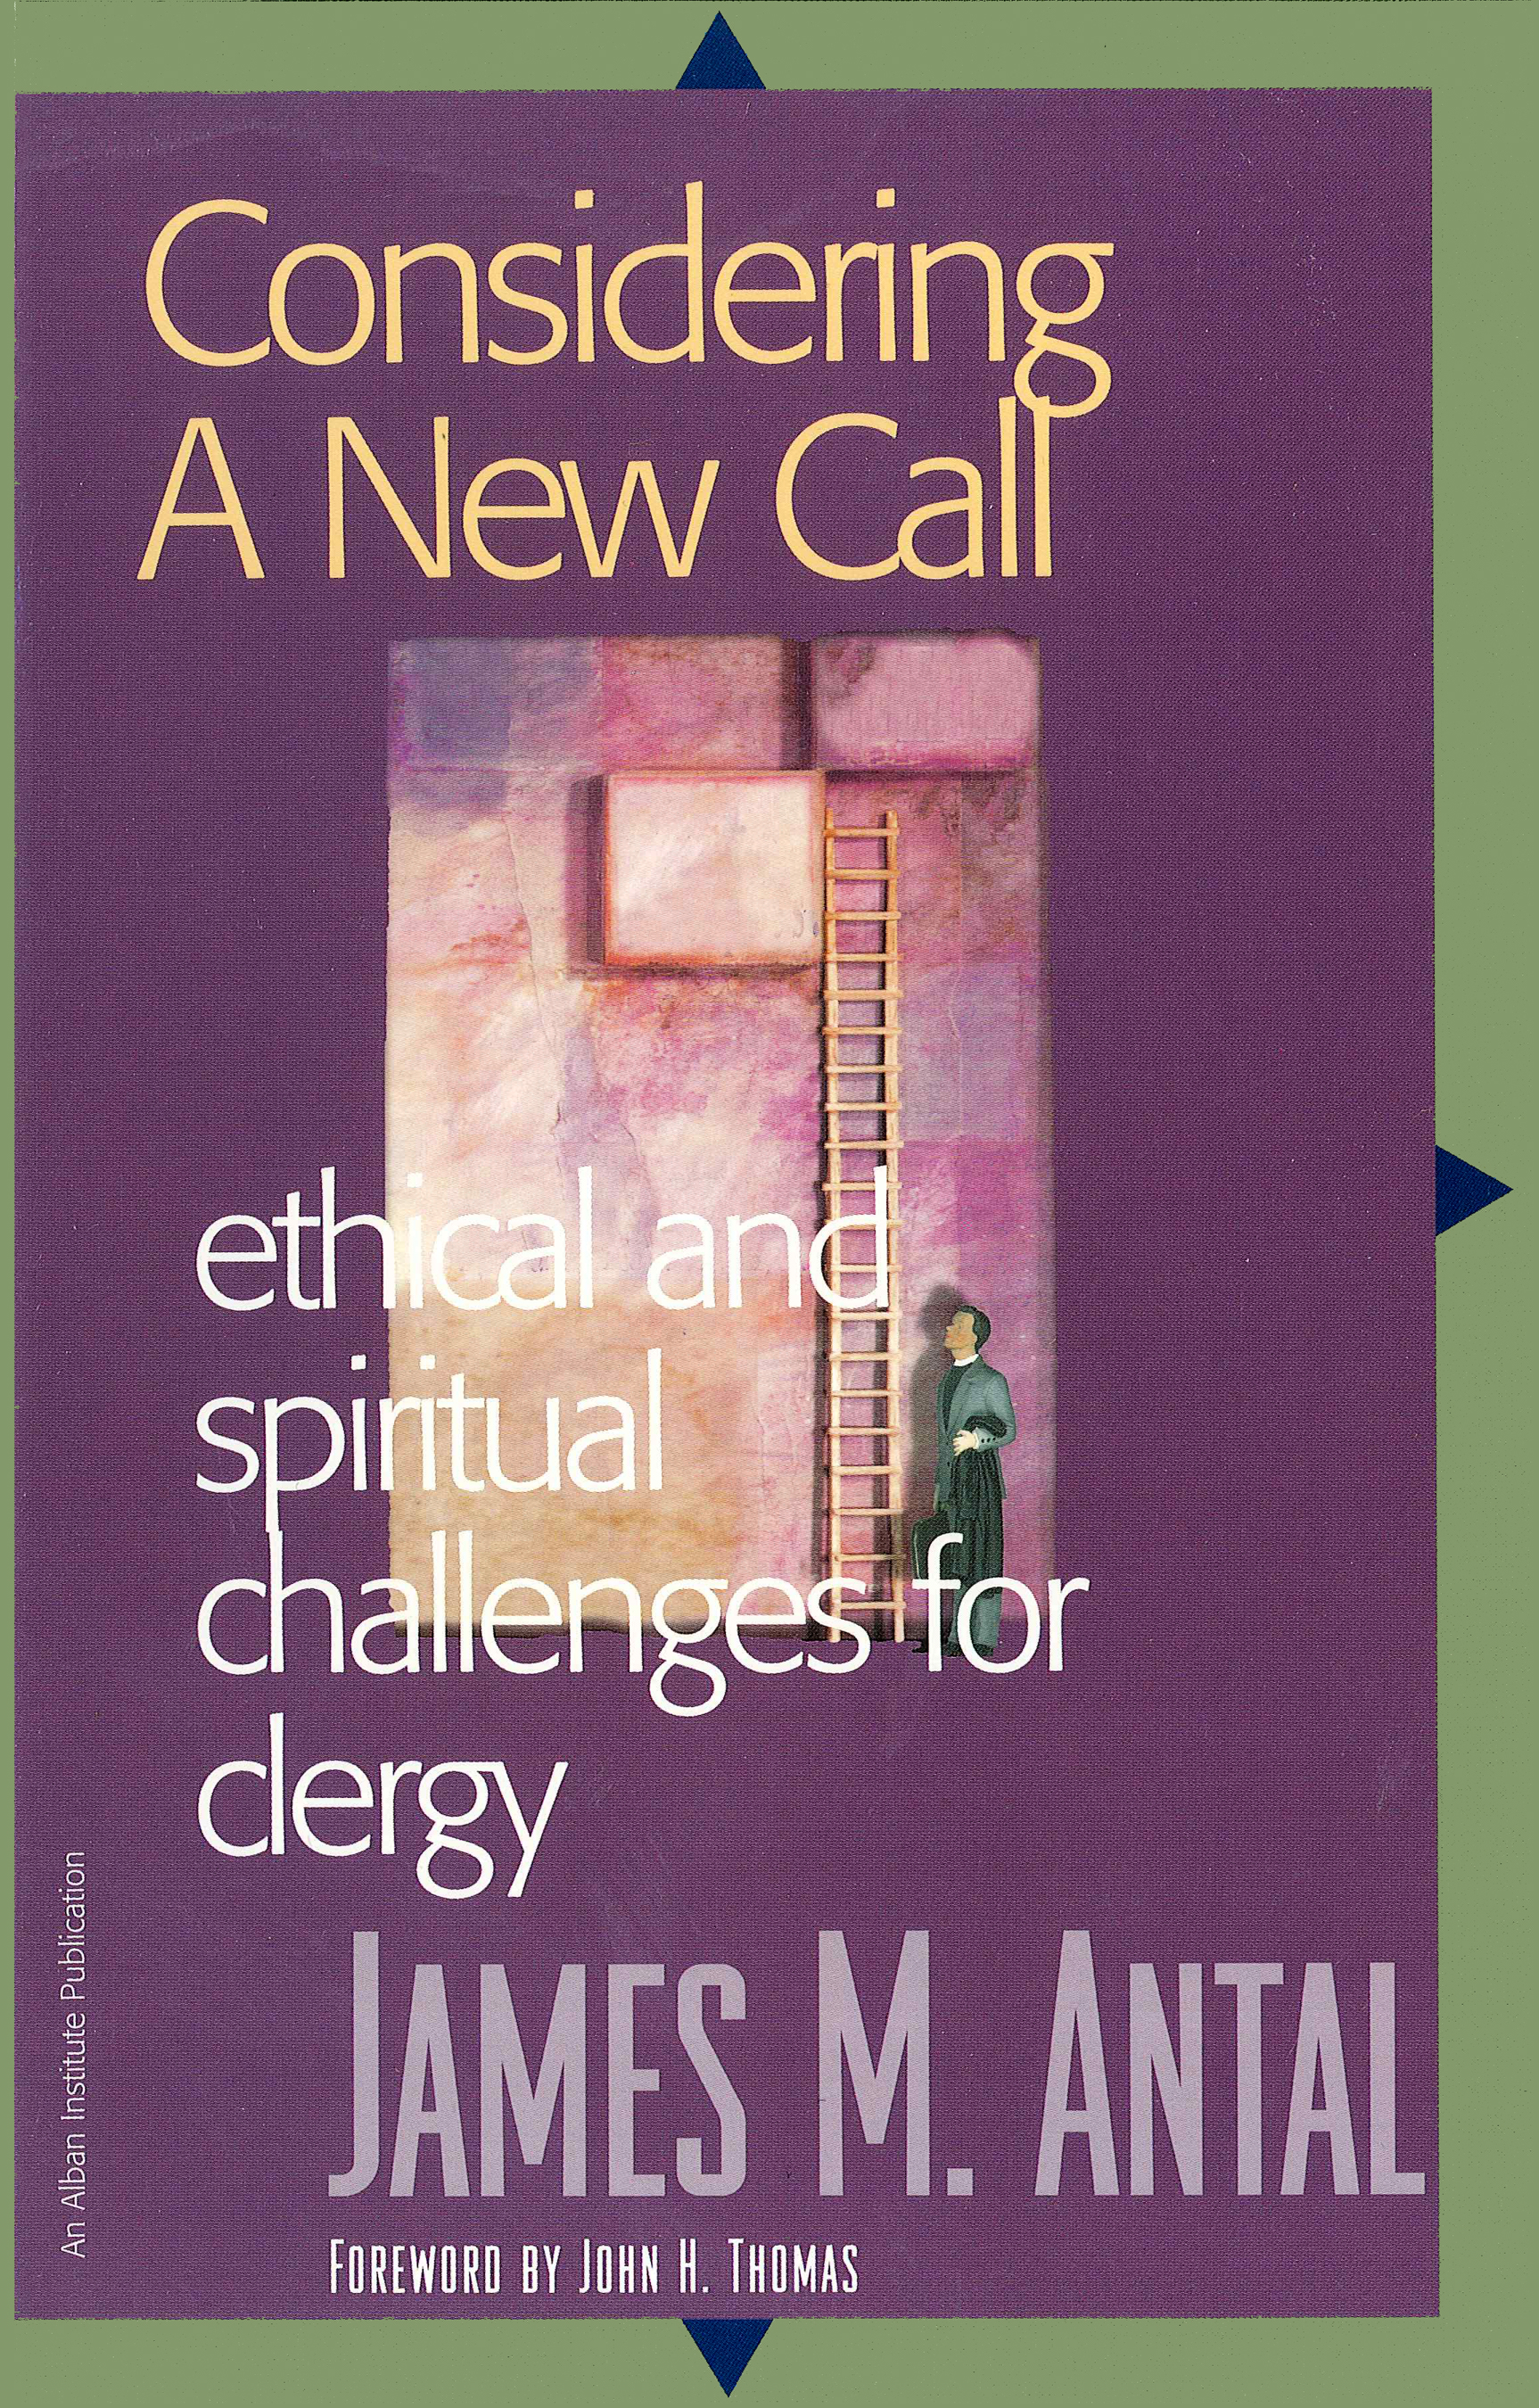 Considering a New Call: Ethical and Spiritual Challenges for Clergy